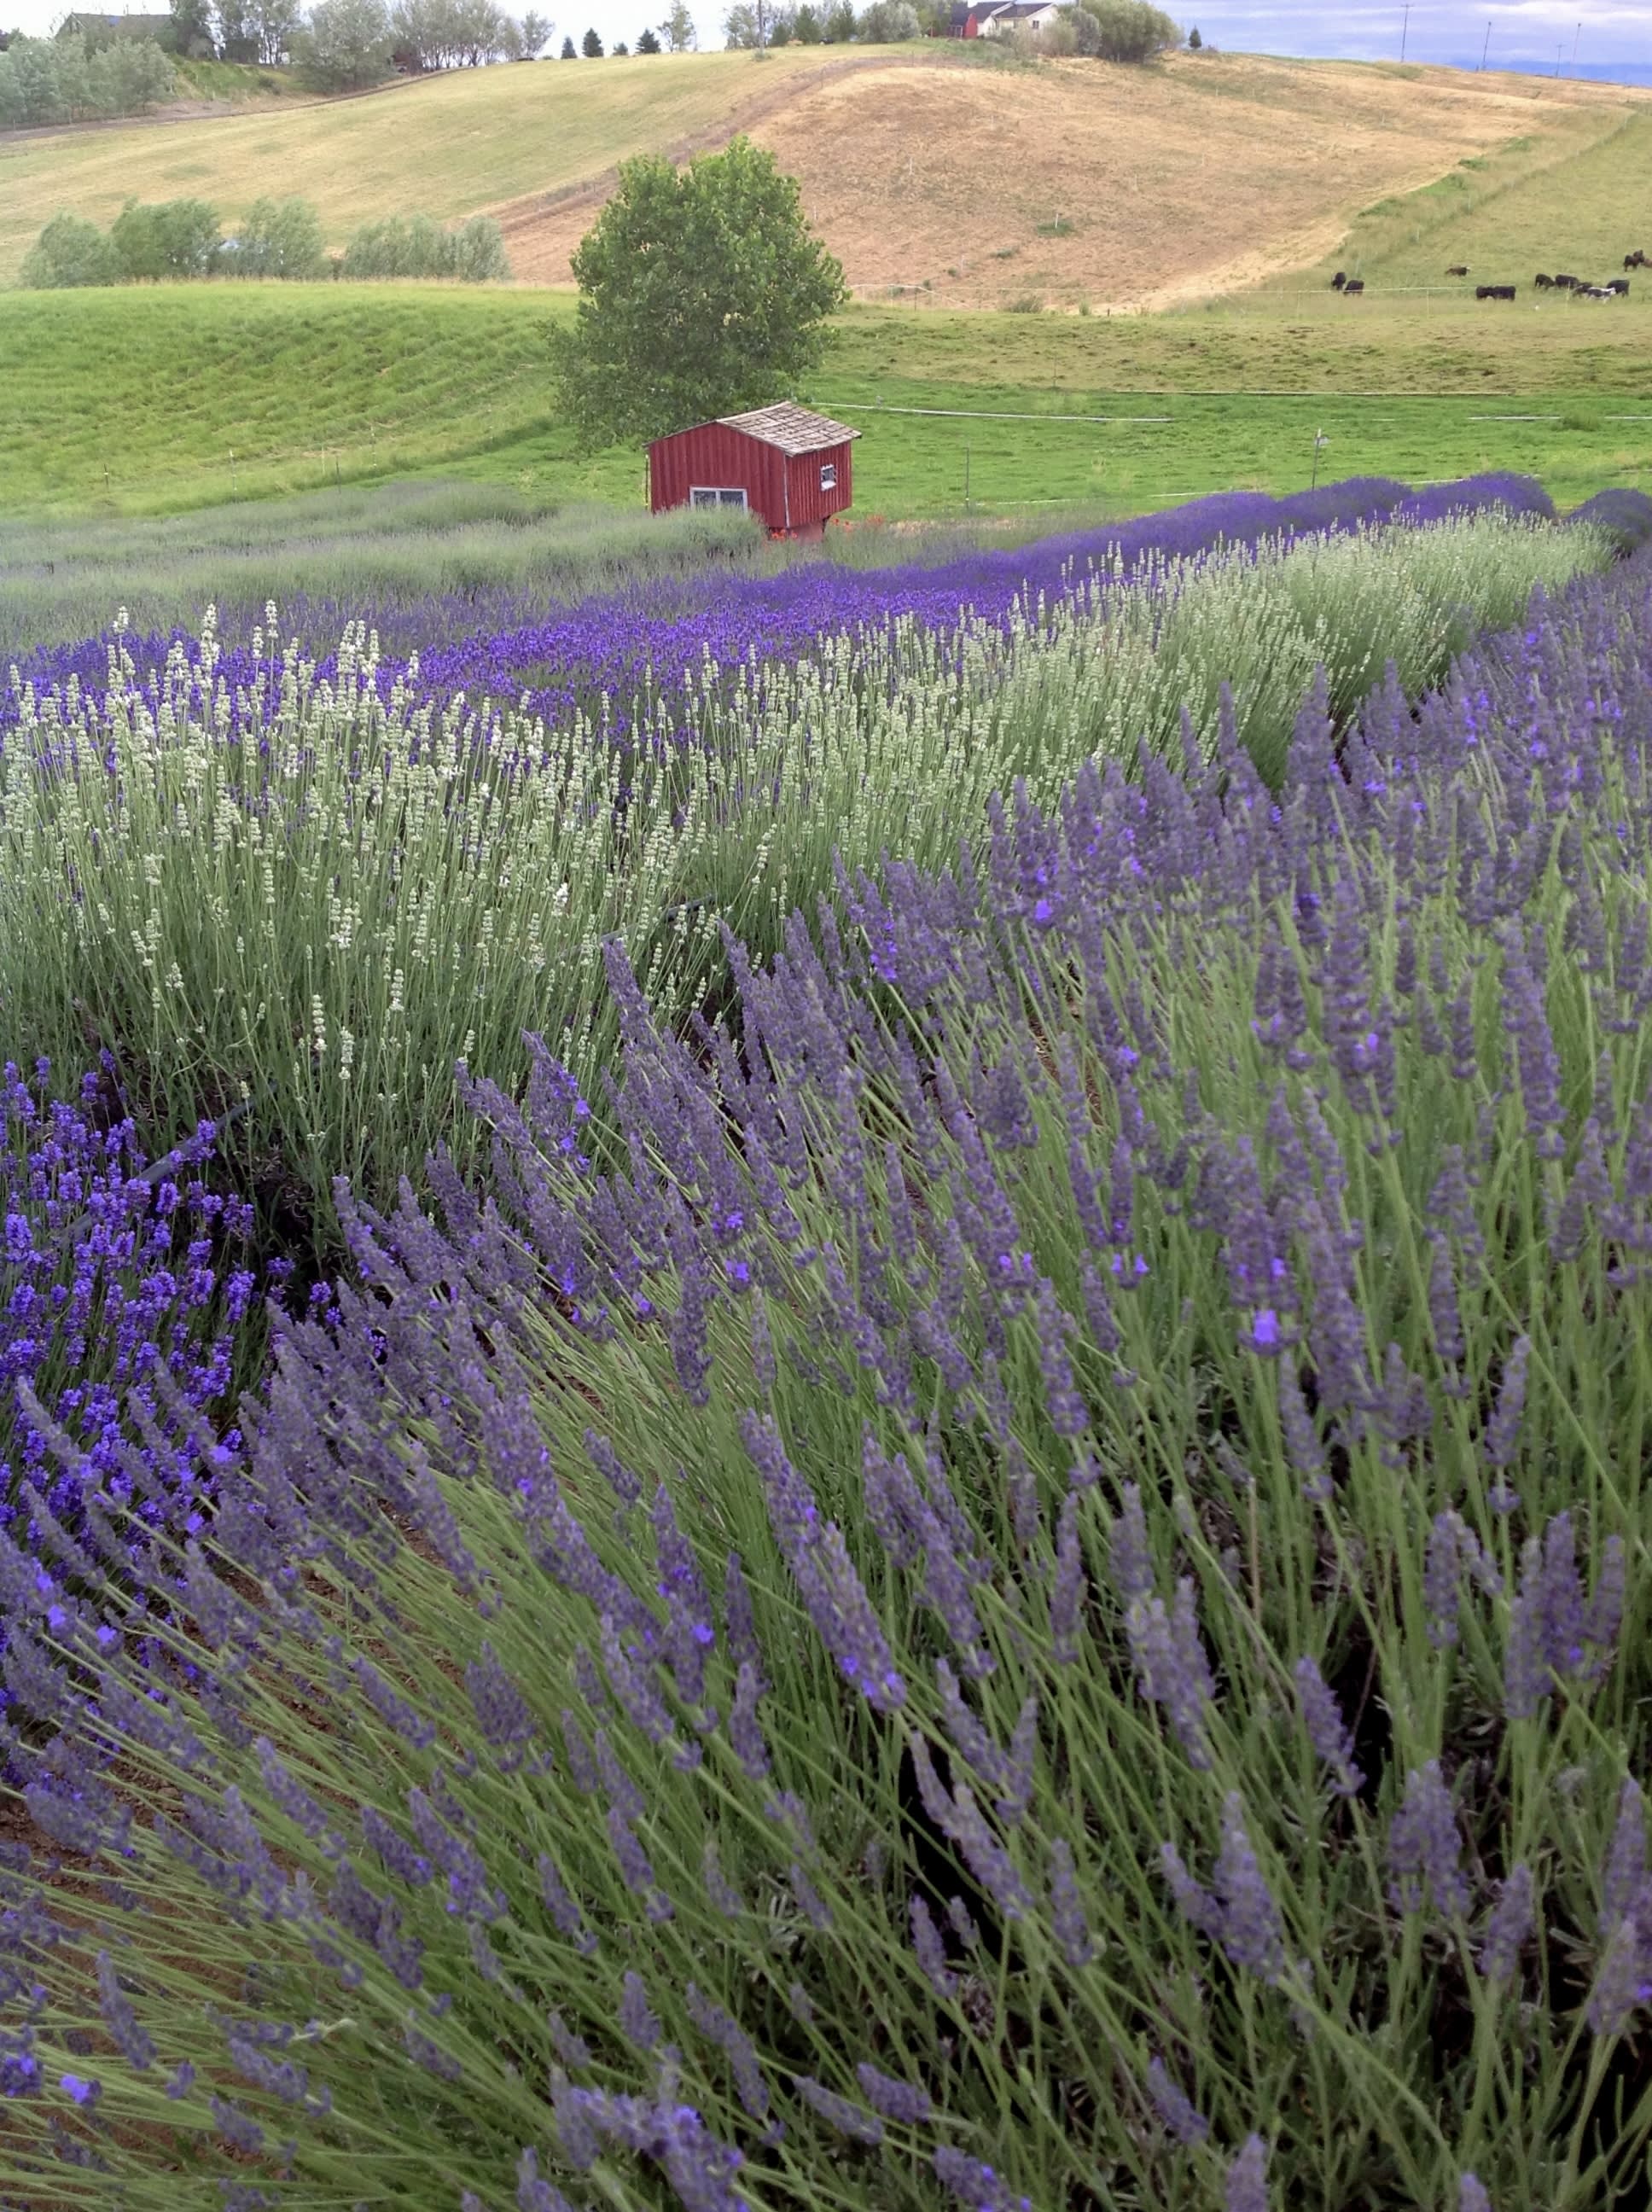 Little Red Shed in lavender field